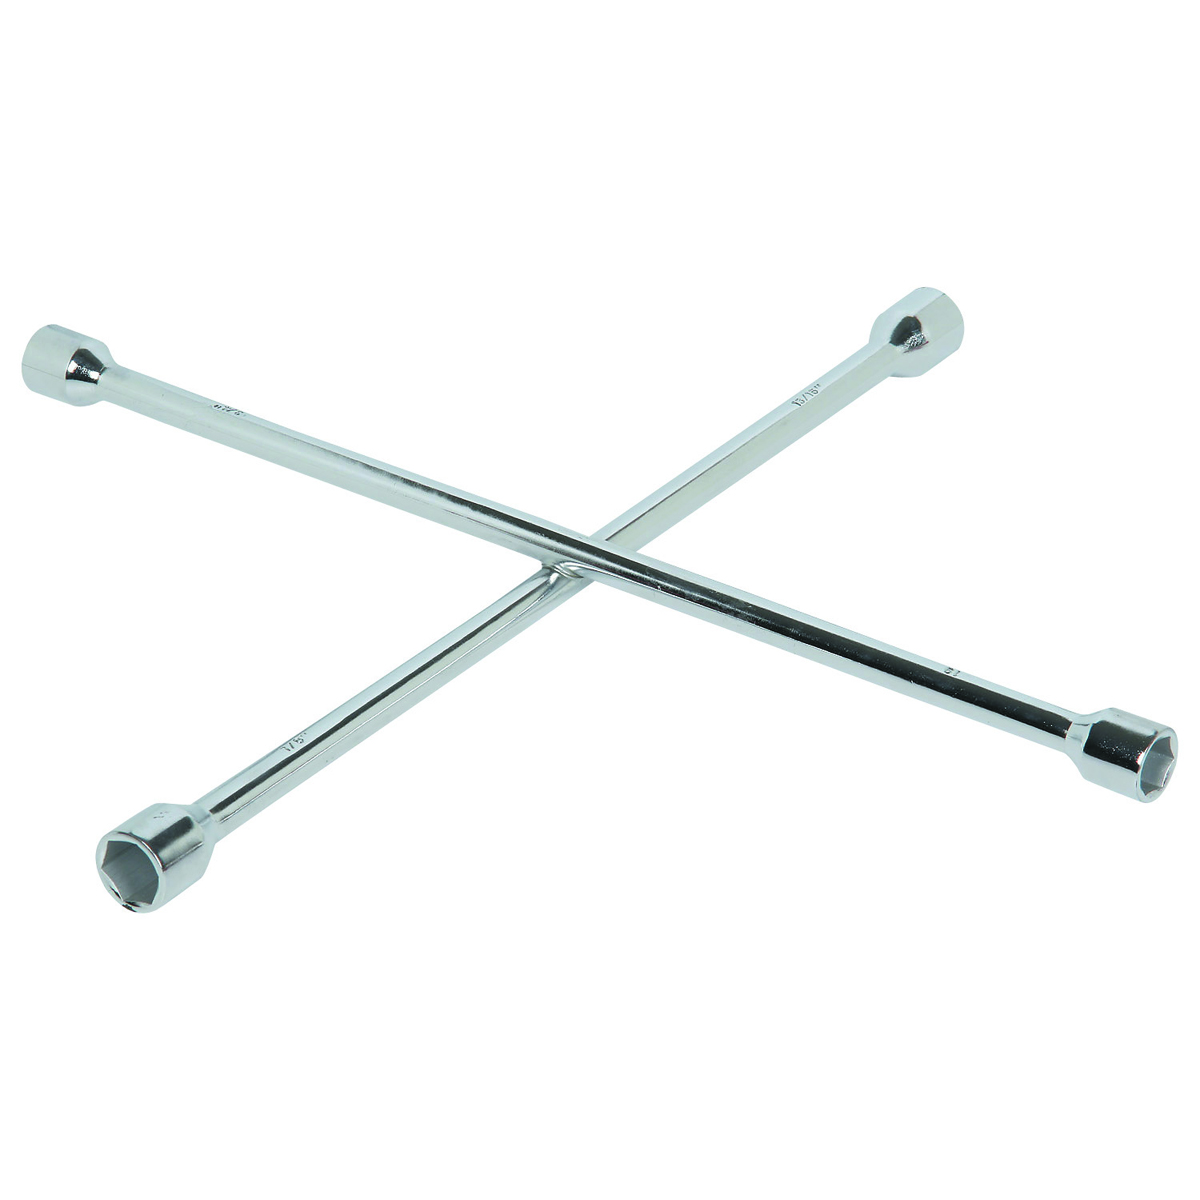 PITTSBURGH AUTOMOTIVE 20 In. Four-Way Lug Wrench - Item 94110 / 56573 / 61574 / 09473